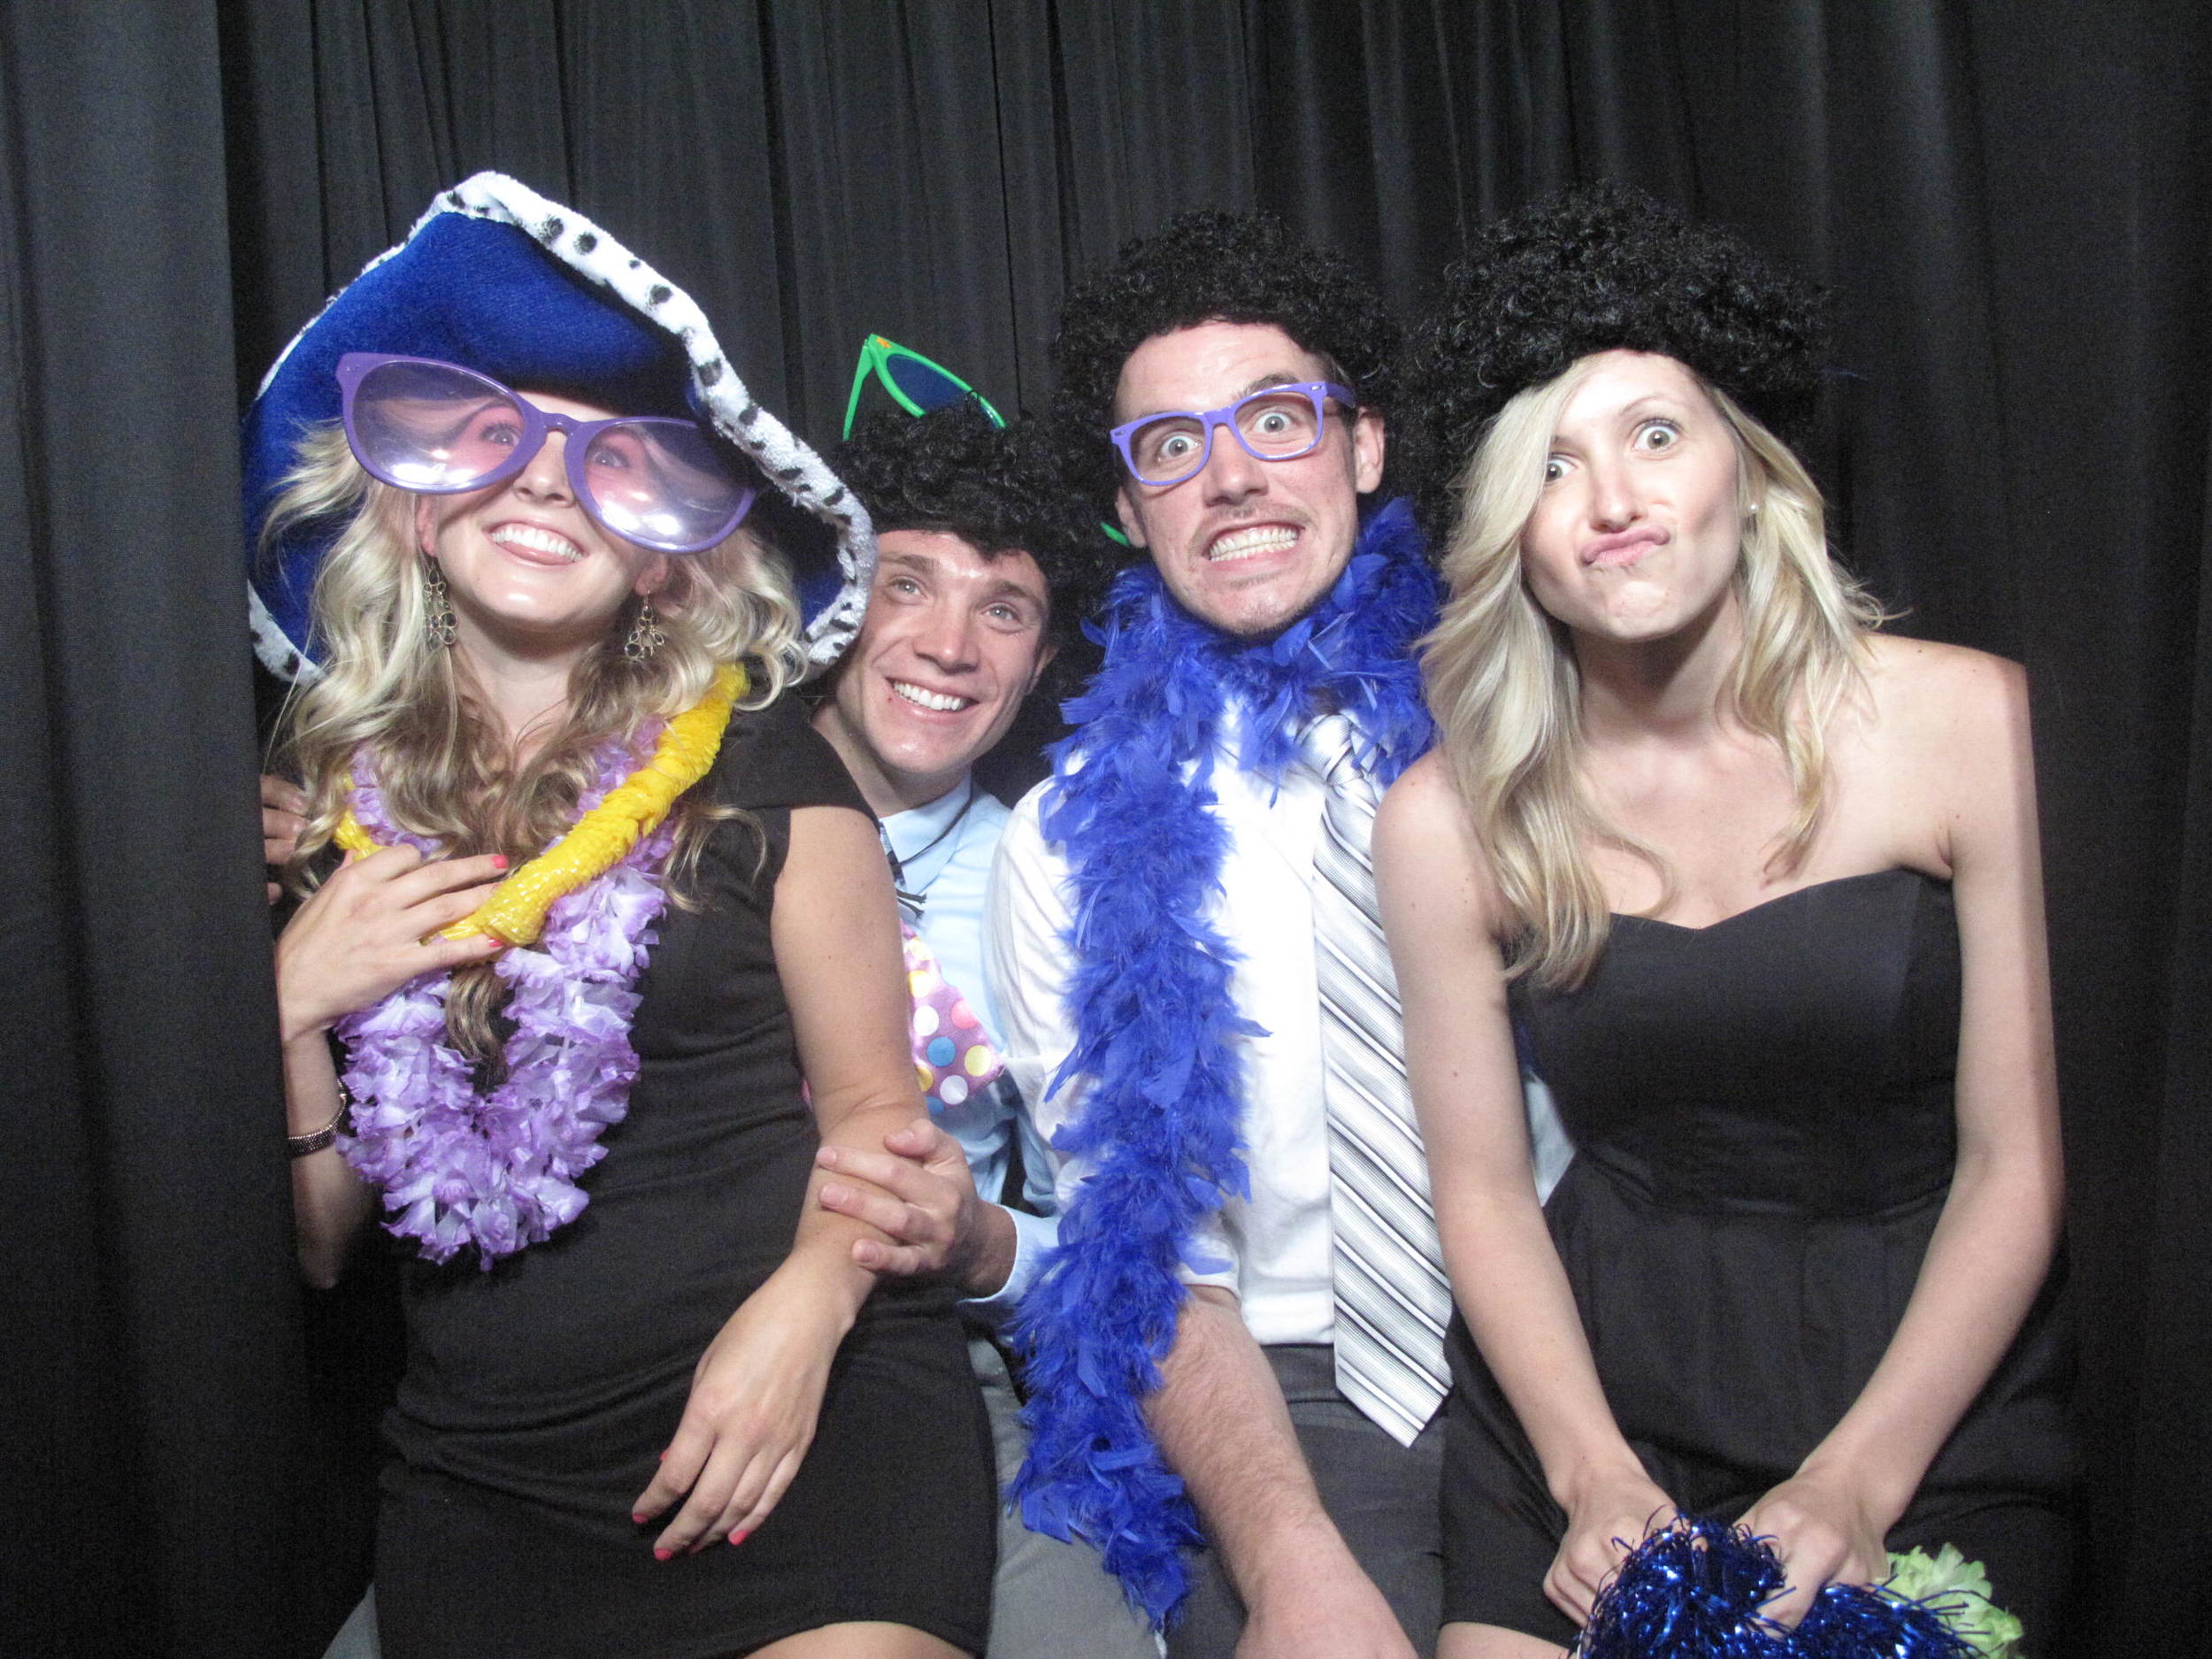 Snapshot Photobooths at The Merion in Cinnaminson, New Jersey